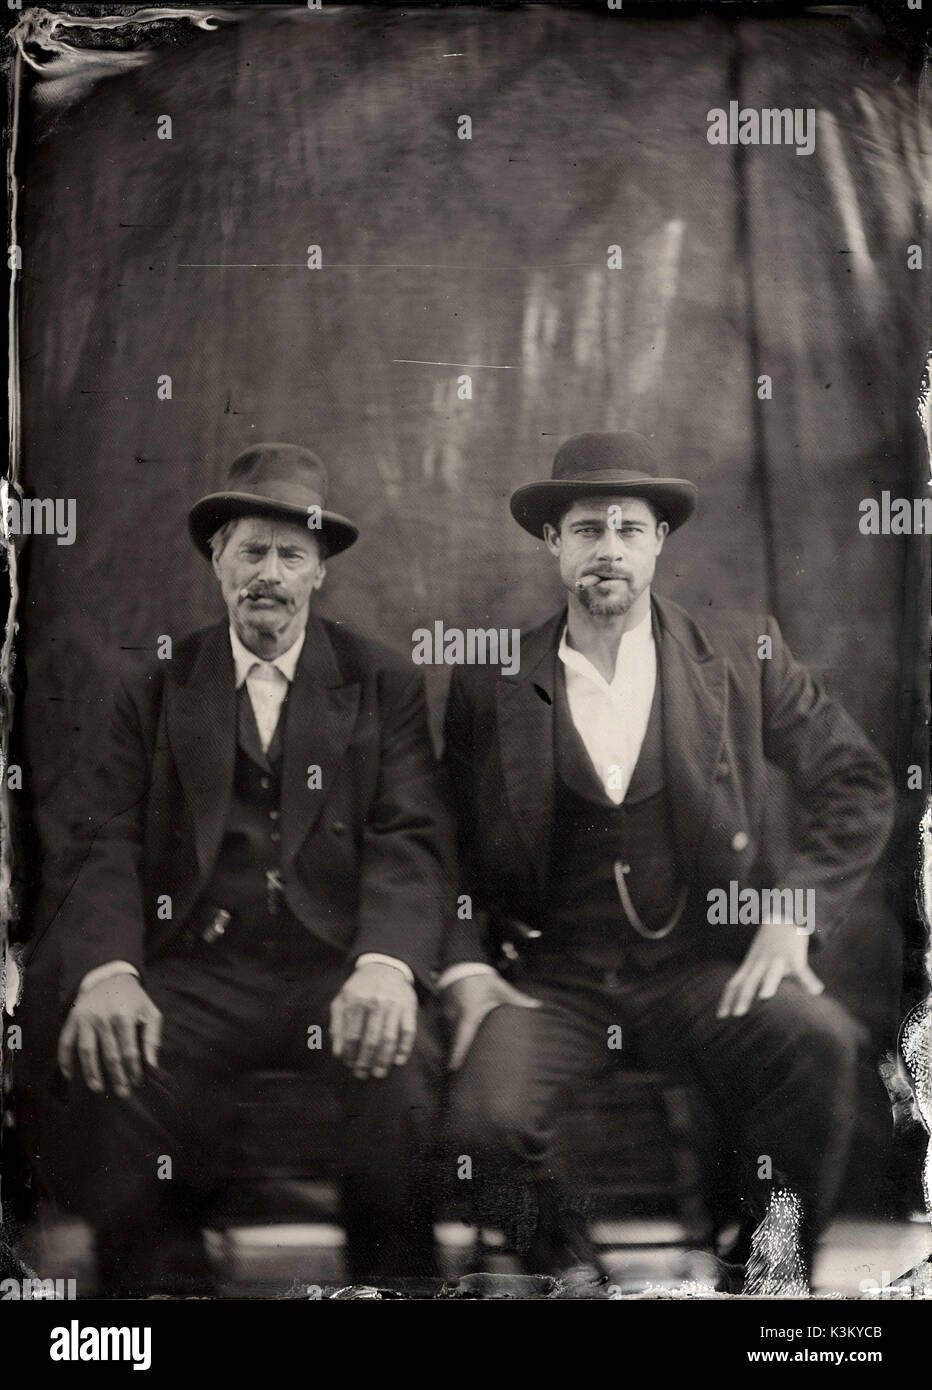 THE ASSASSINATION OF JESSE JAMES BY THE COWARD ROBERT FORD  SAM SHEPARD as Frank James, BRAD PITT as Jesse James       Date: 2007 Stock Photo